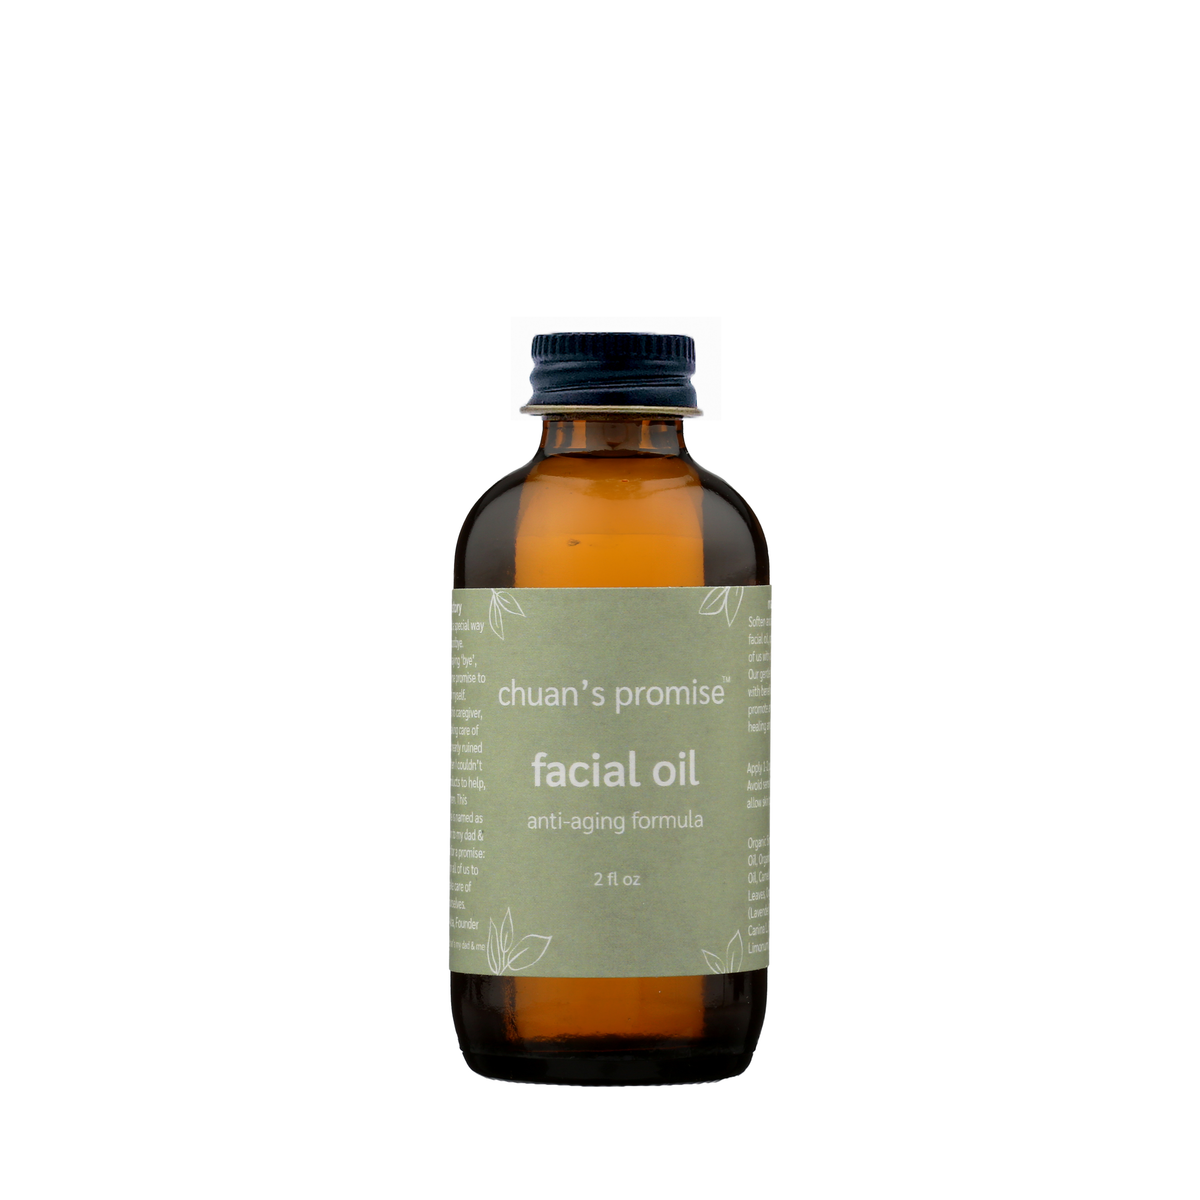 Facial Oil - For All Skin Types, Acne Prone and Anti-Aging